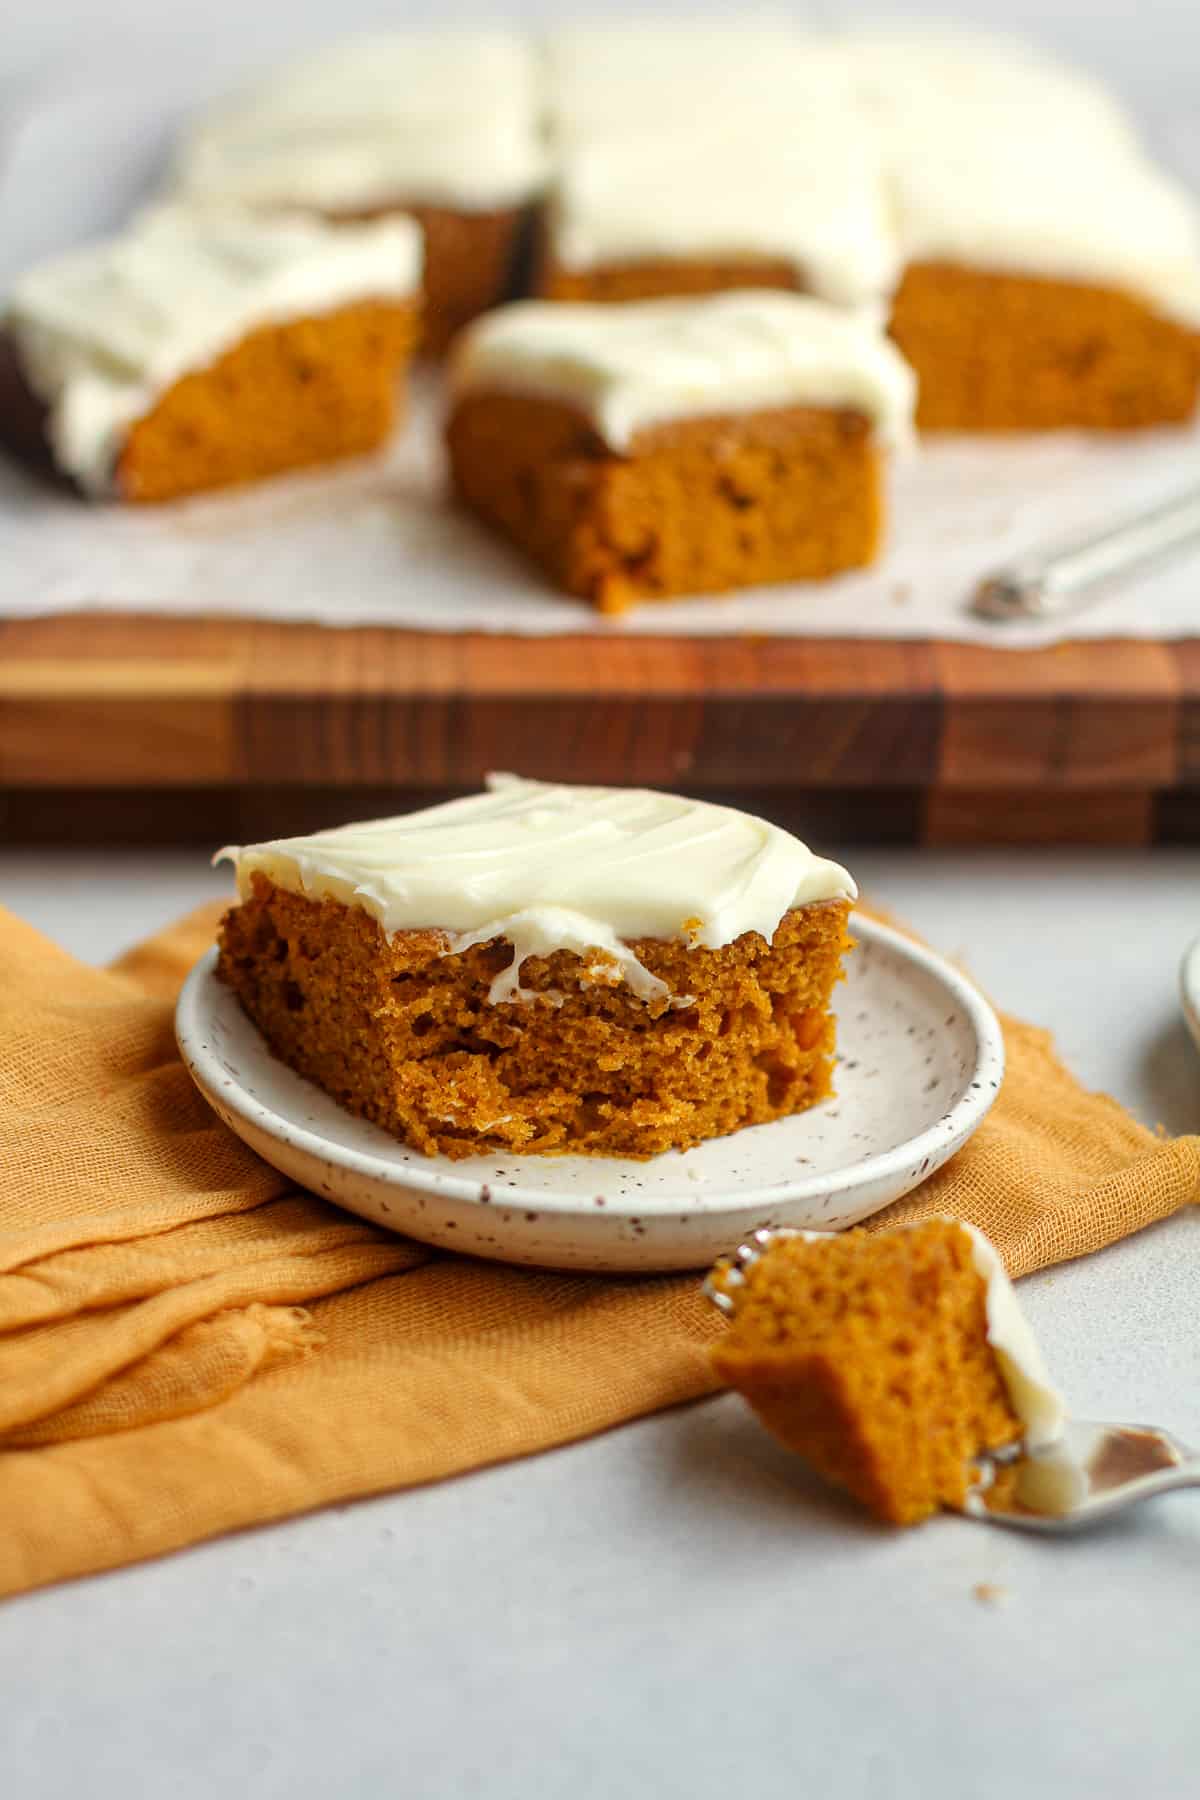 Side view of a piece of pumpkin cake with a bite out.